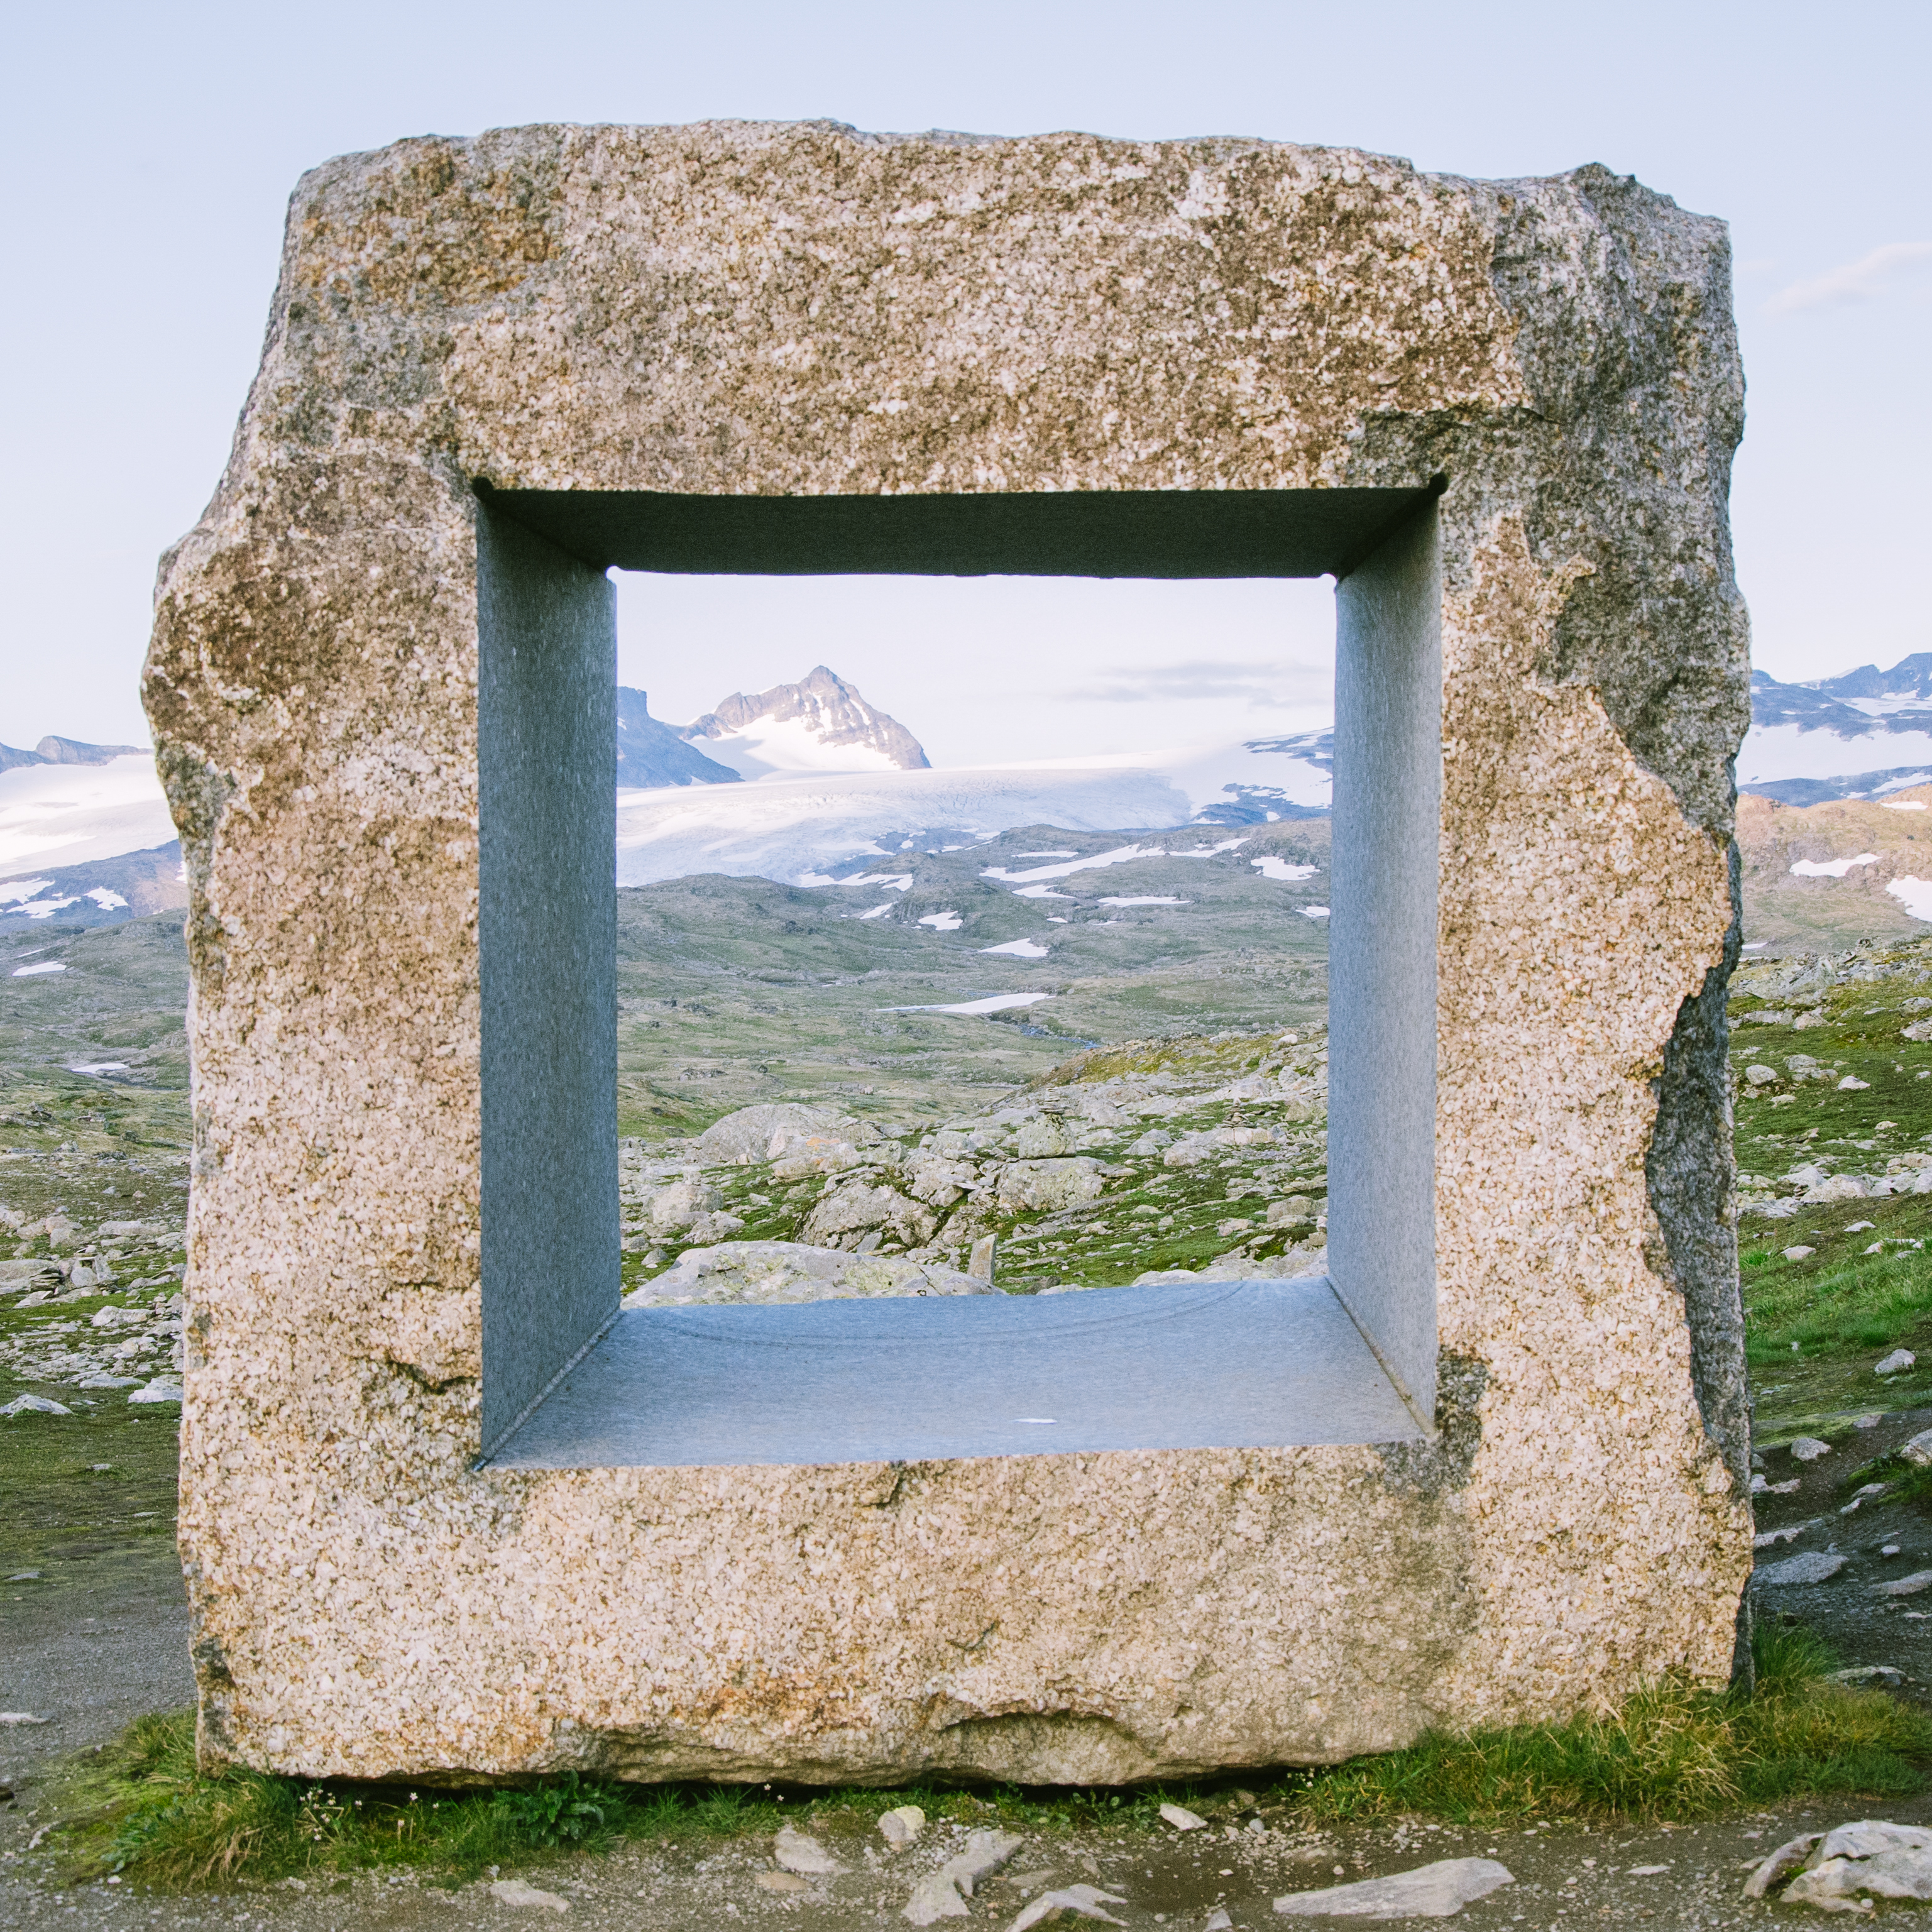 A large square frame made from stone. Its inside edges are perfectly even, while the outside edges are uneven stone. Placed high up in the mountains and hills.